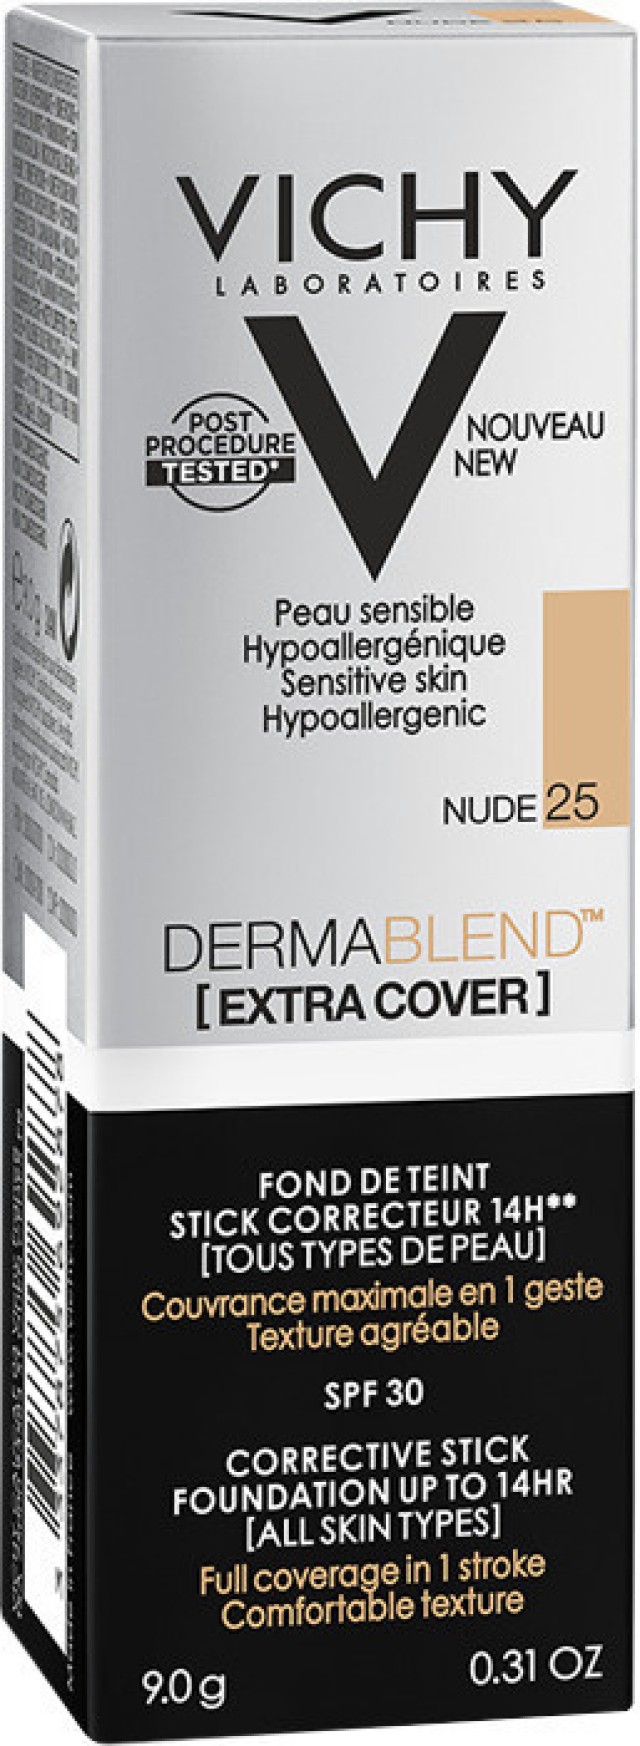 Vichy Dermablend Extra Cover No.25 Nude SPF30 Διορθωτικό Foundation Σε Μορφή Stick 9gr